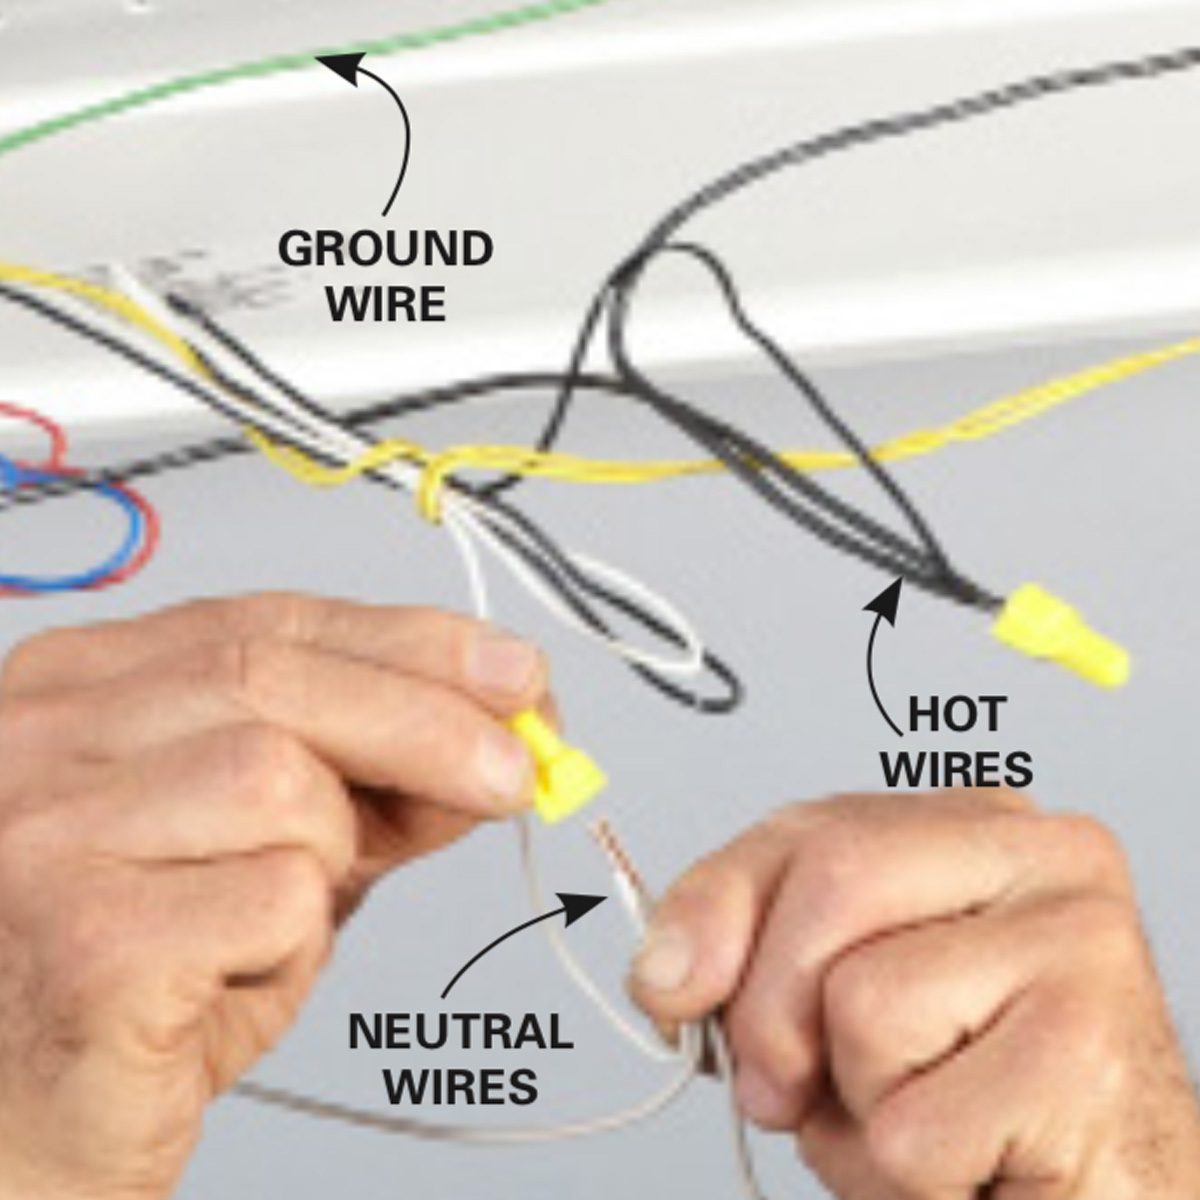 connecting fixture wires safely